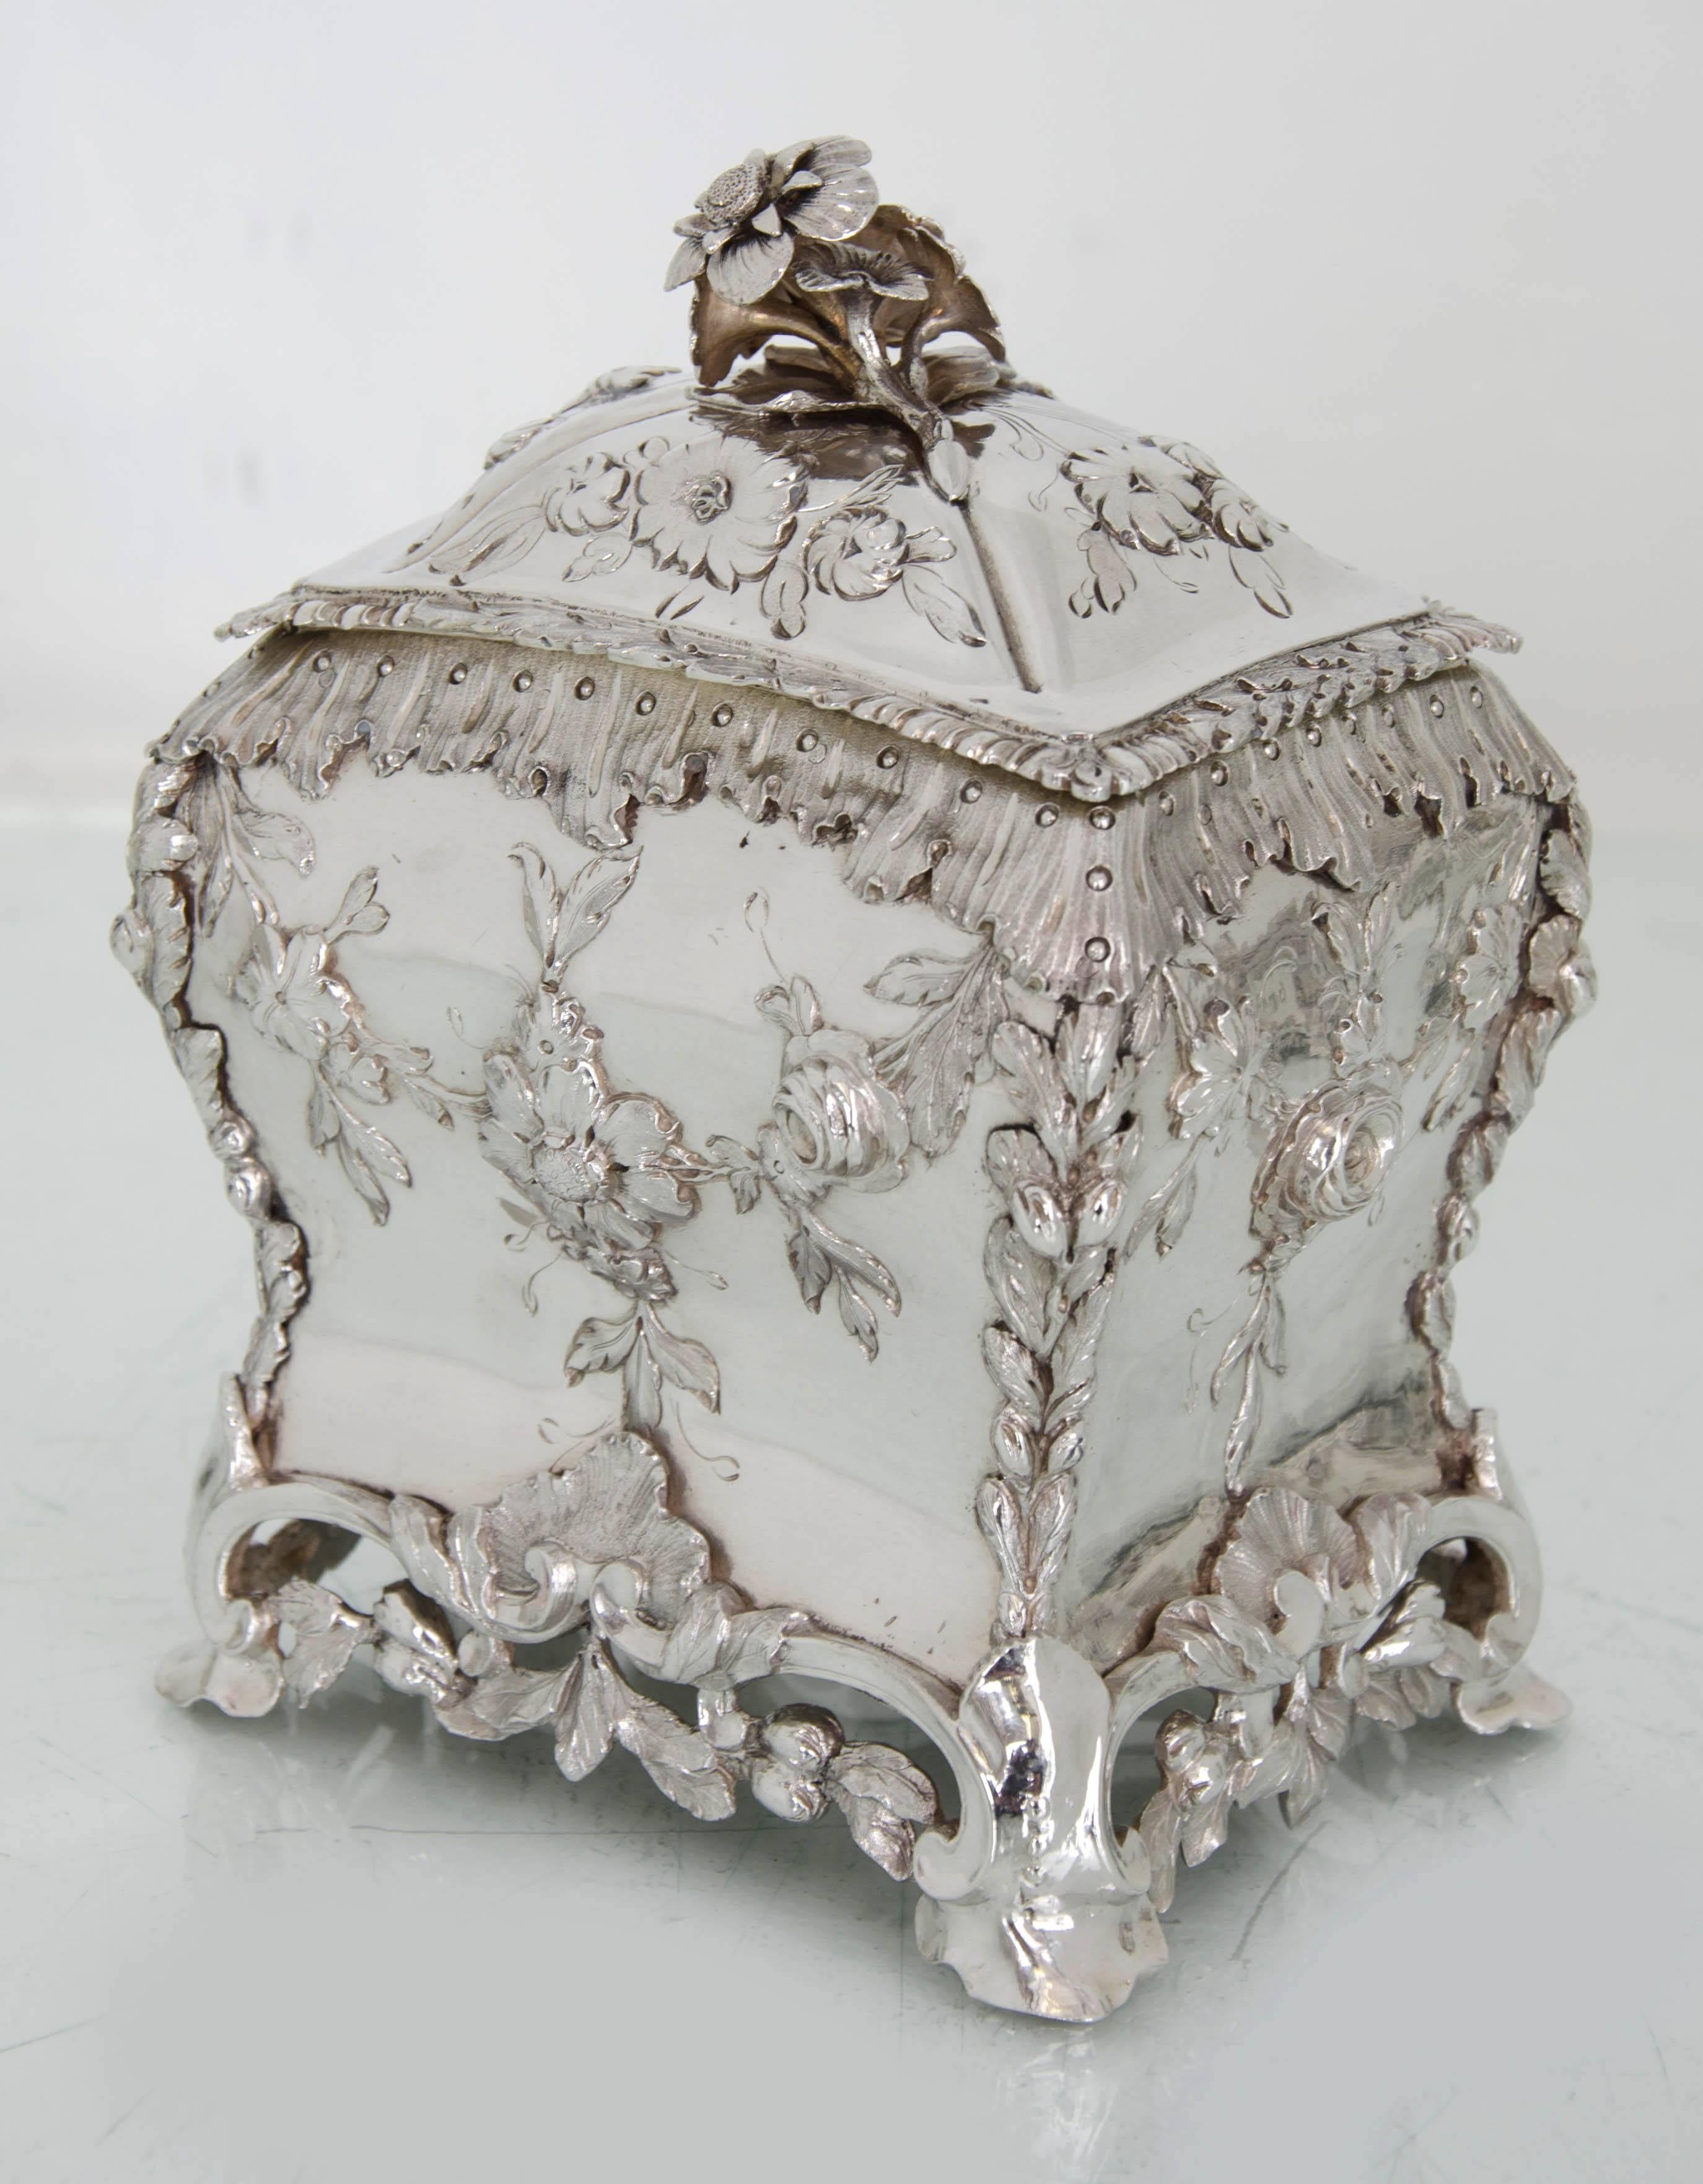 Hand-Crafted Sterling Silver Suite of George III 18/19th Rococo Tea Caddies in Shagreen Case